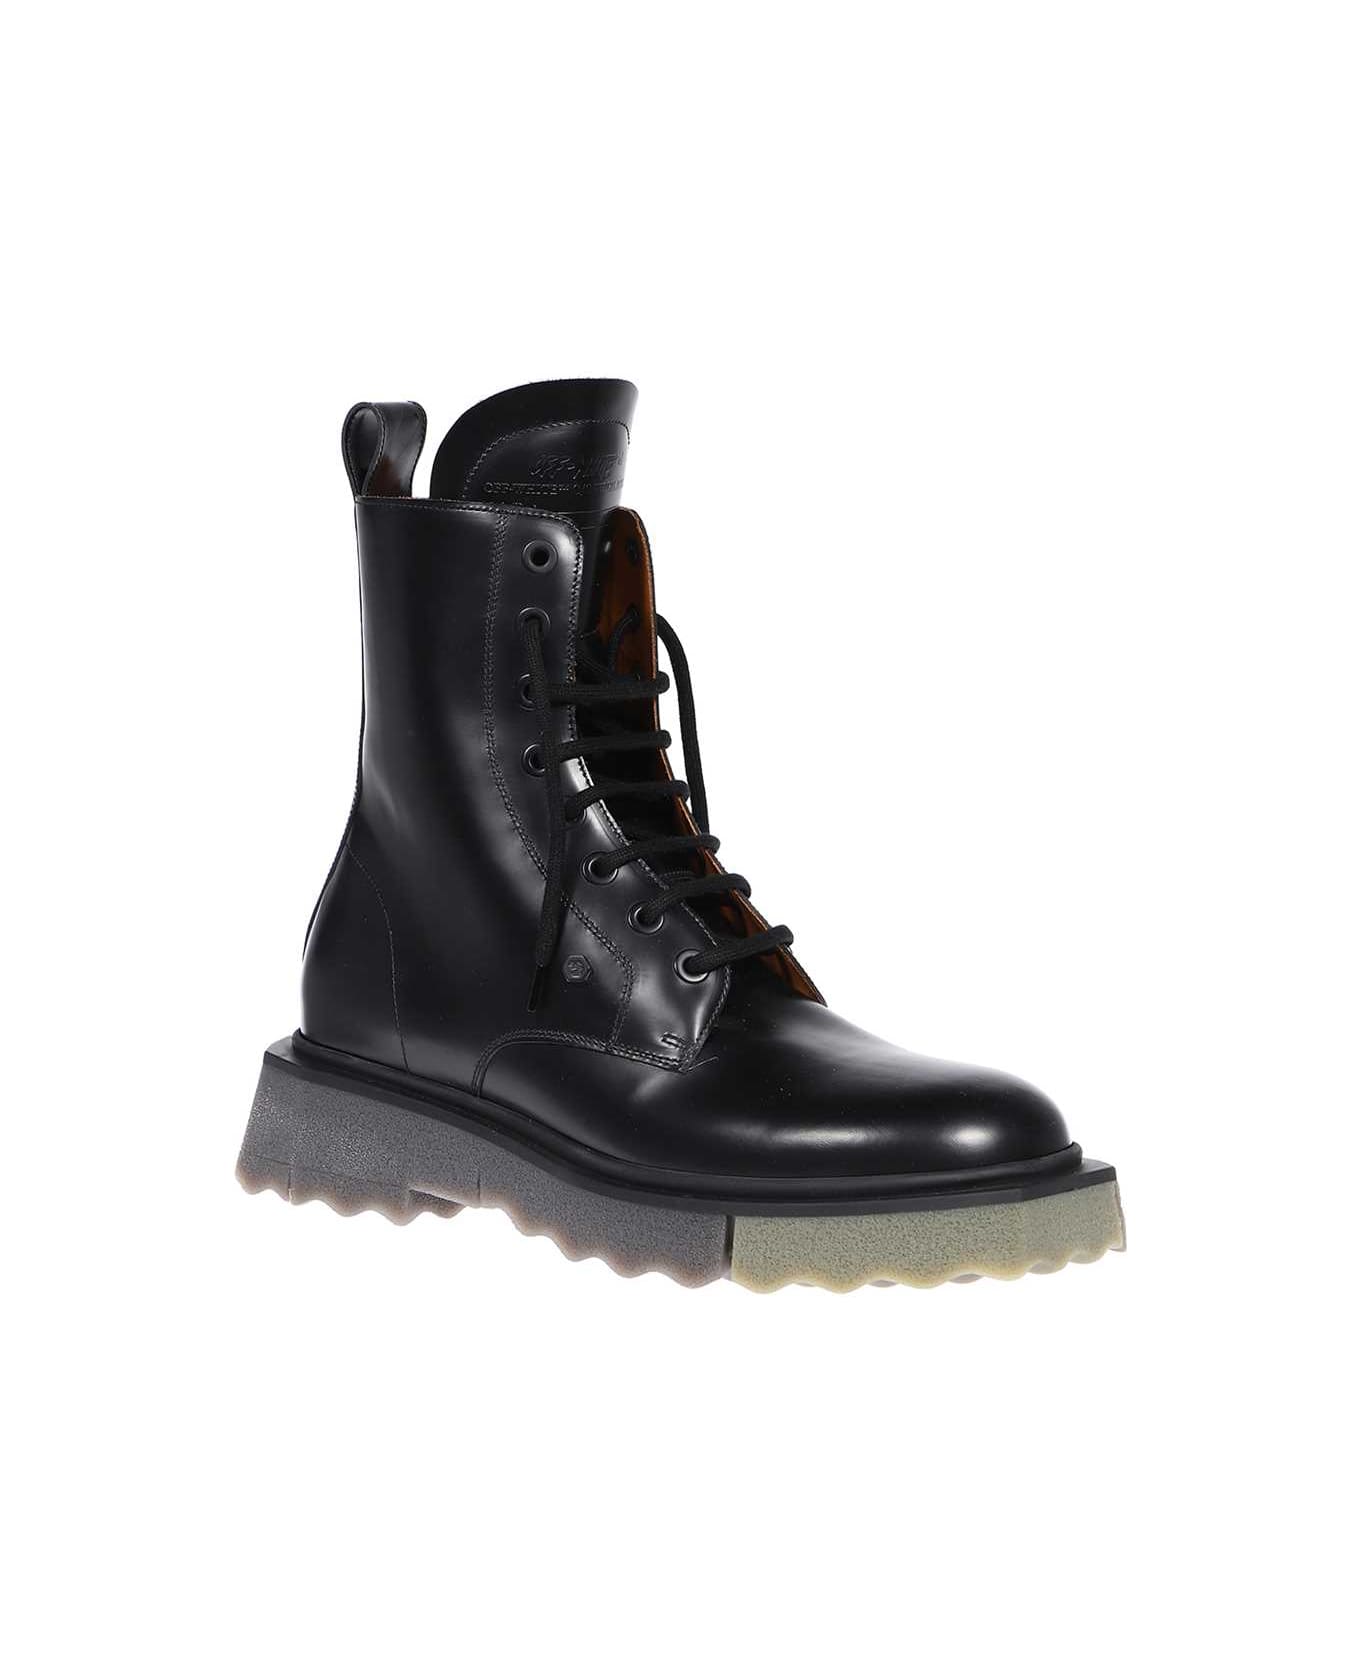 Off-White Leather Lace-up Boots - black